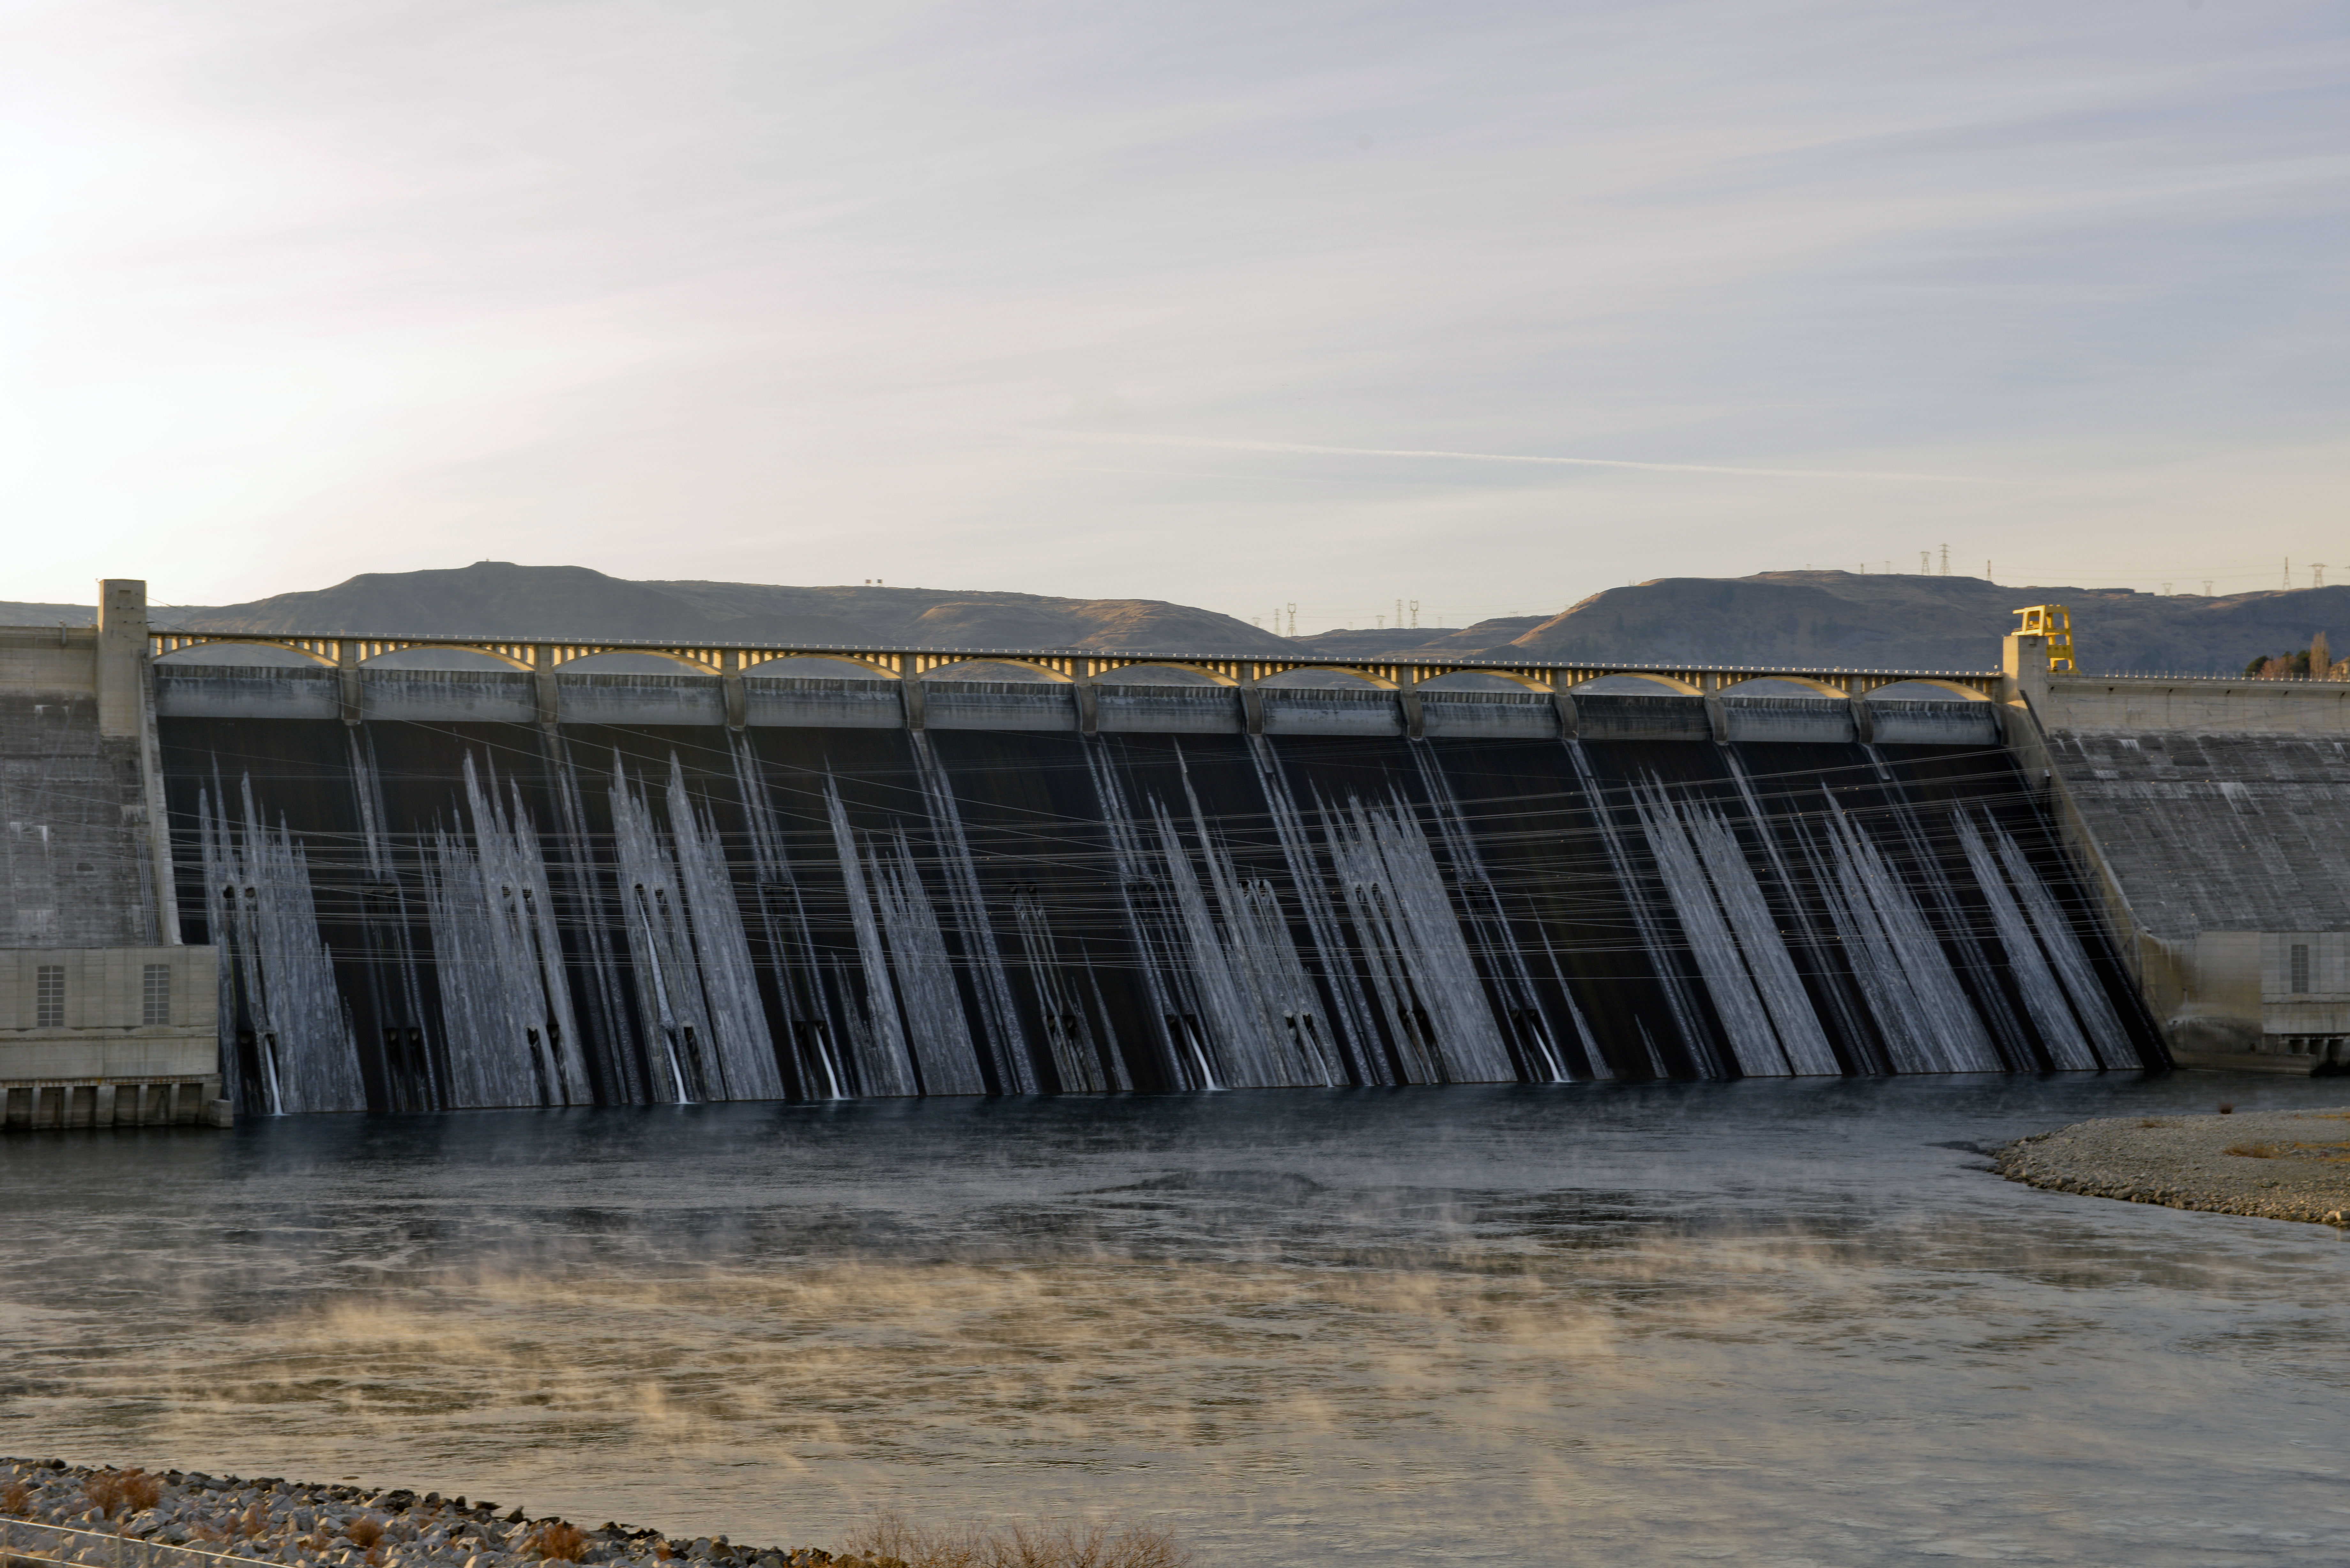 November 21, 2013. Grand Coulee Dam in the morning light. The cold November air causes water to freeze on the face of the dam and steam to rise from the water in the stilling basin.